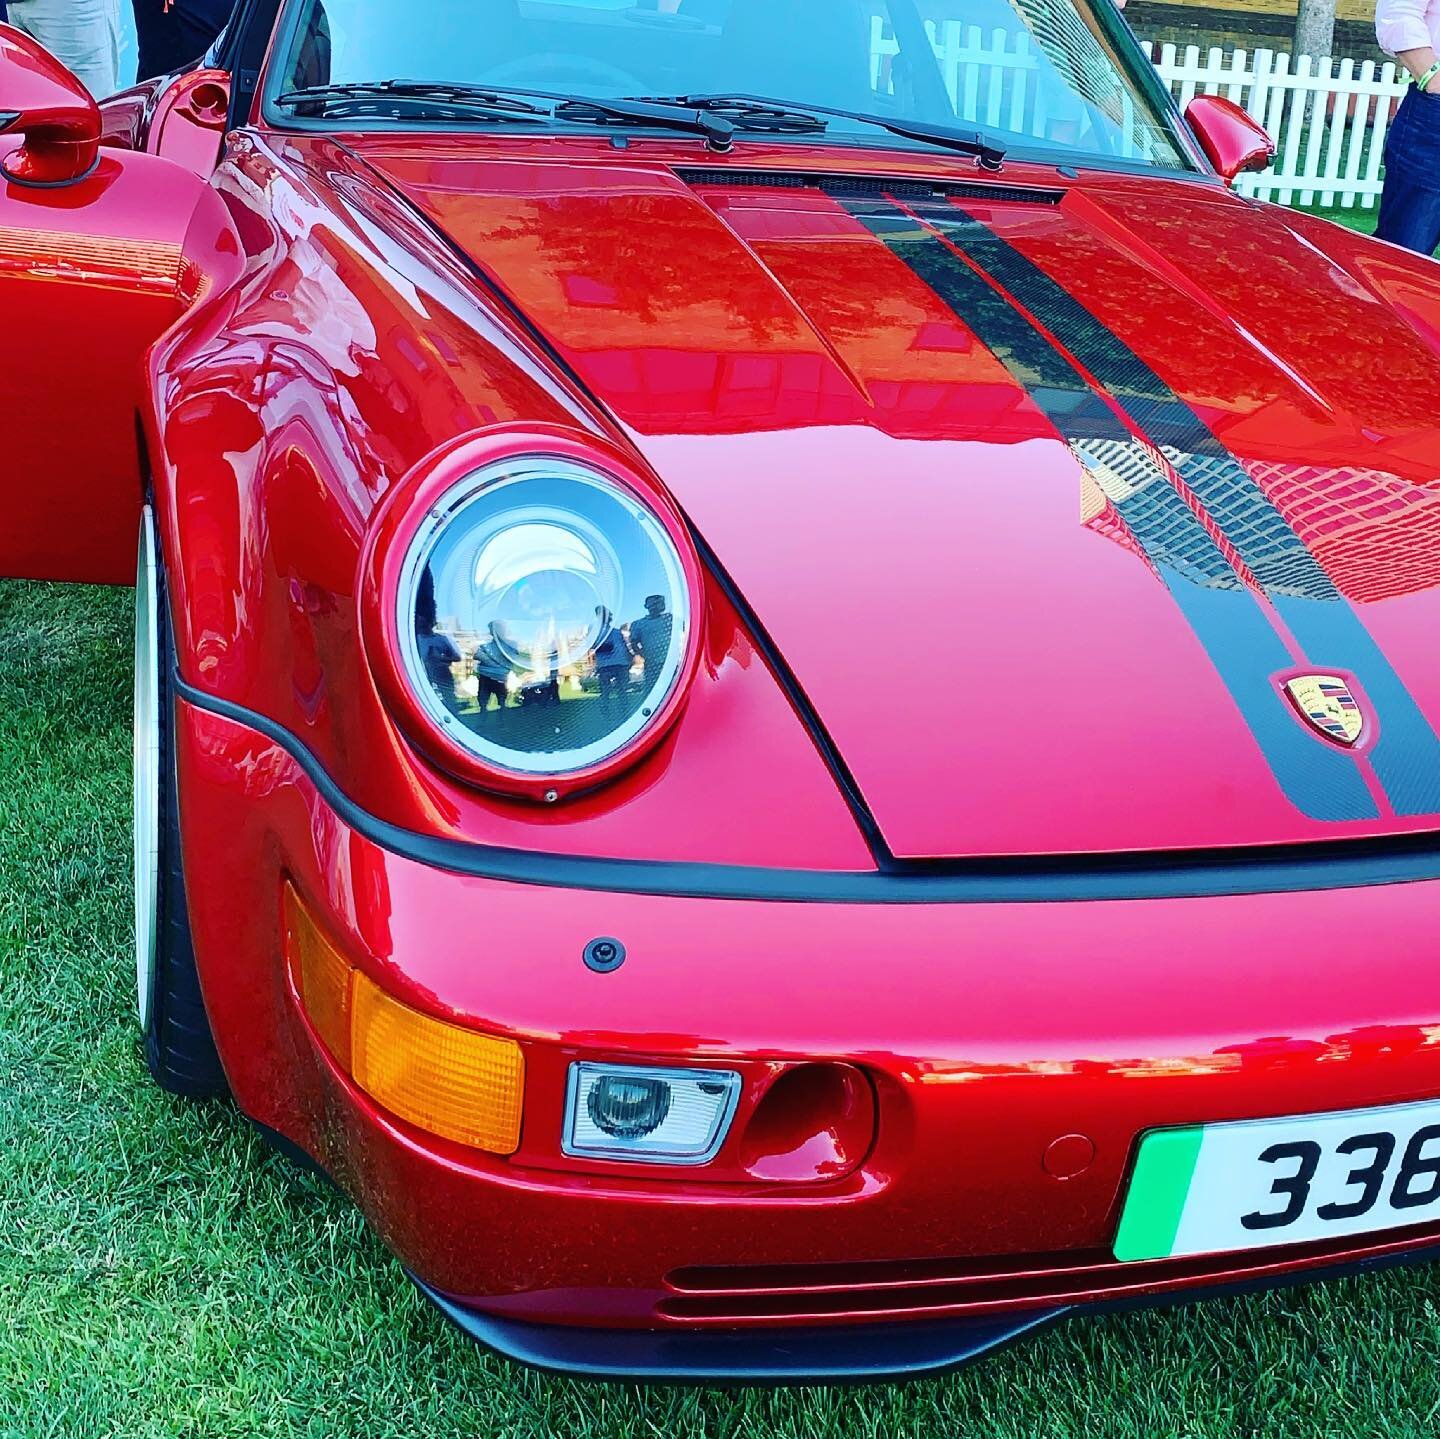 #MbE today at #londonconcours with our friends at #everrati #everrati911 #electricporsche - thank you for looking after us #retroclassic #thefutureiselectric